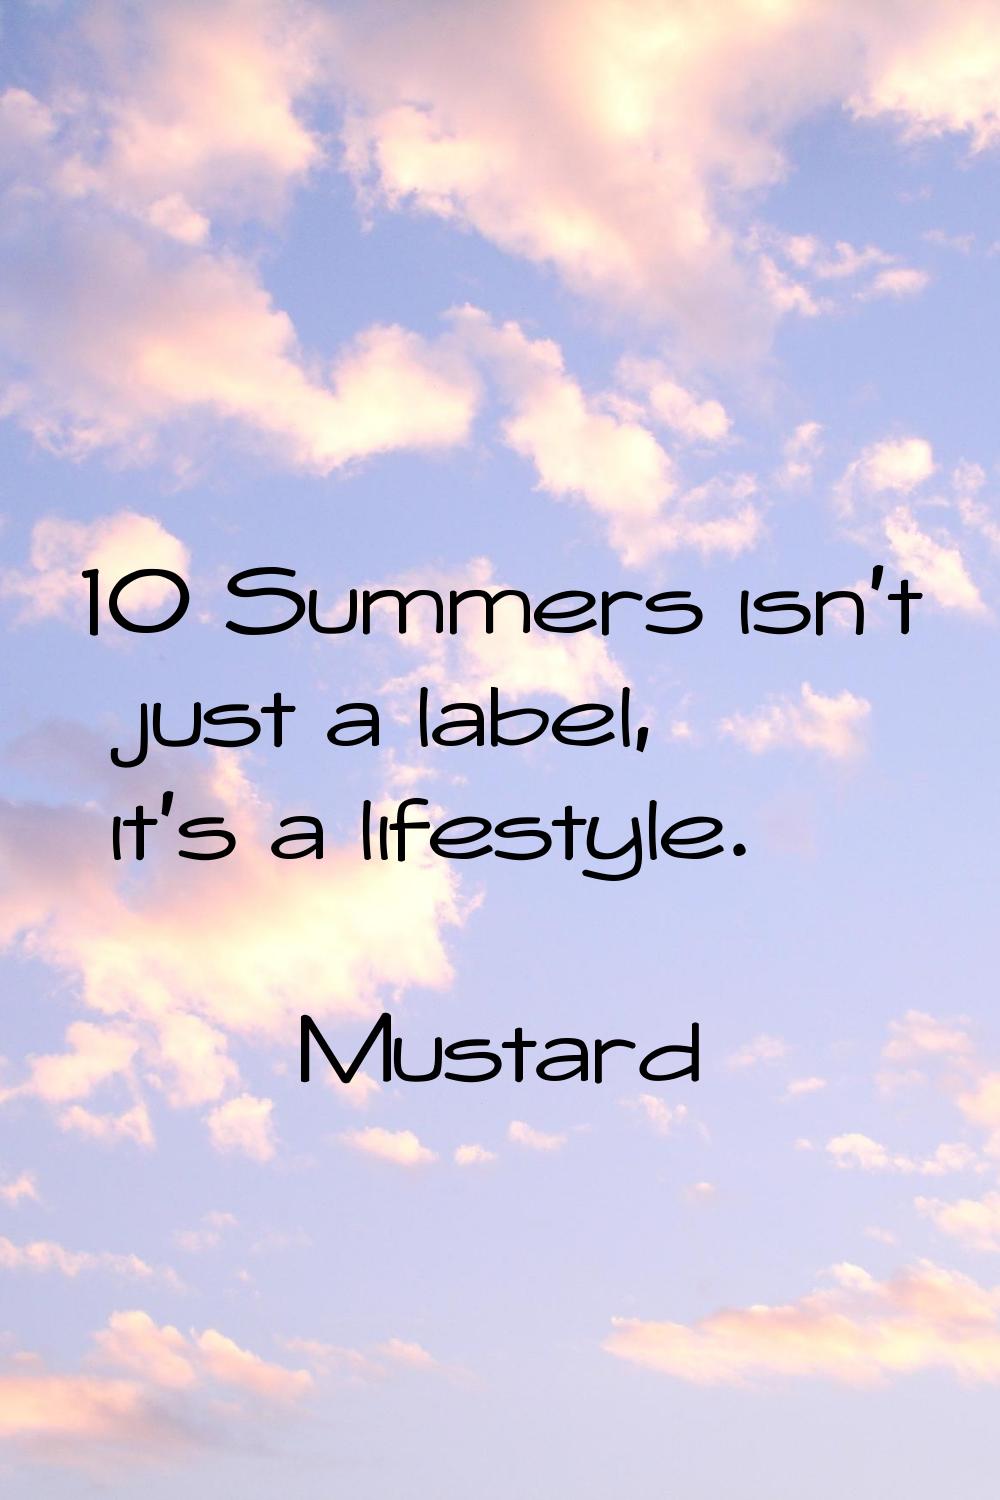 10 Summers isn't just a label, it's a lifestyle.